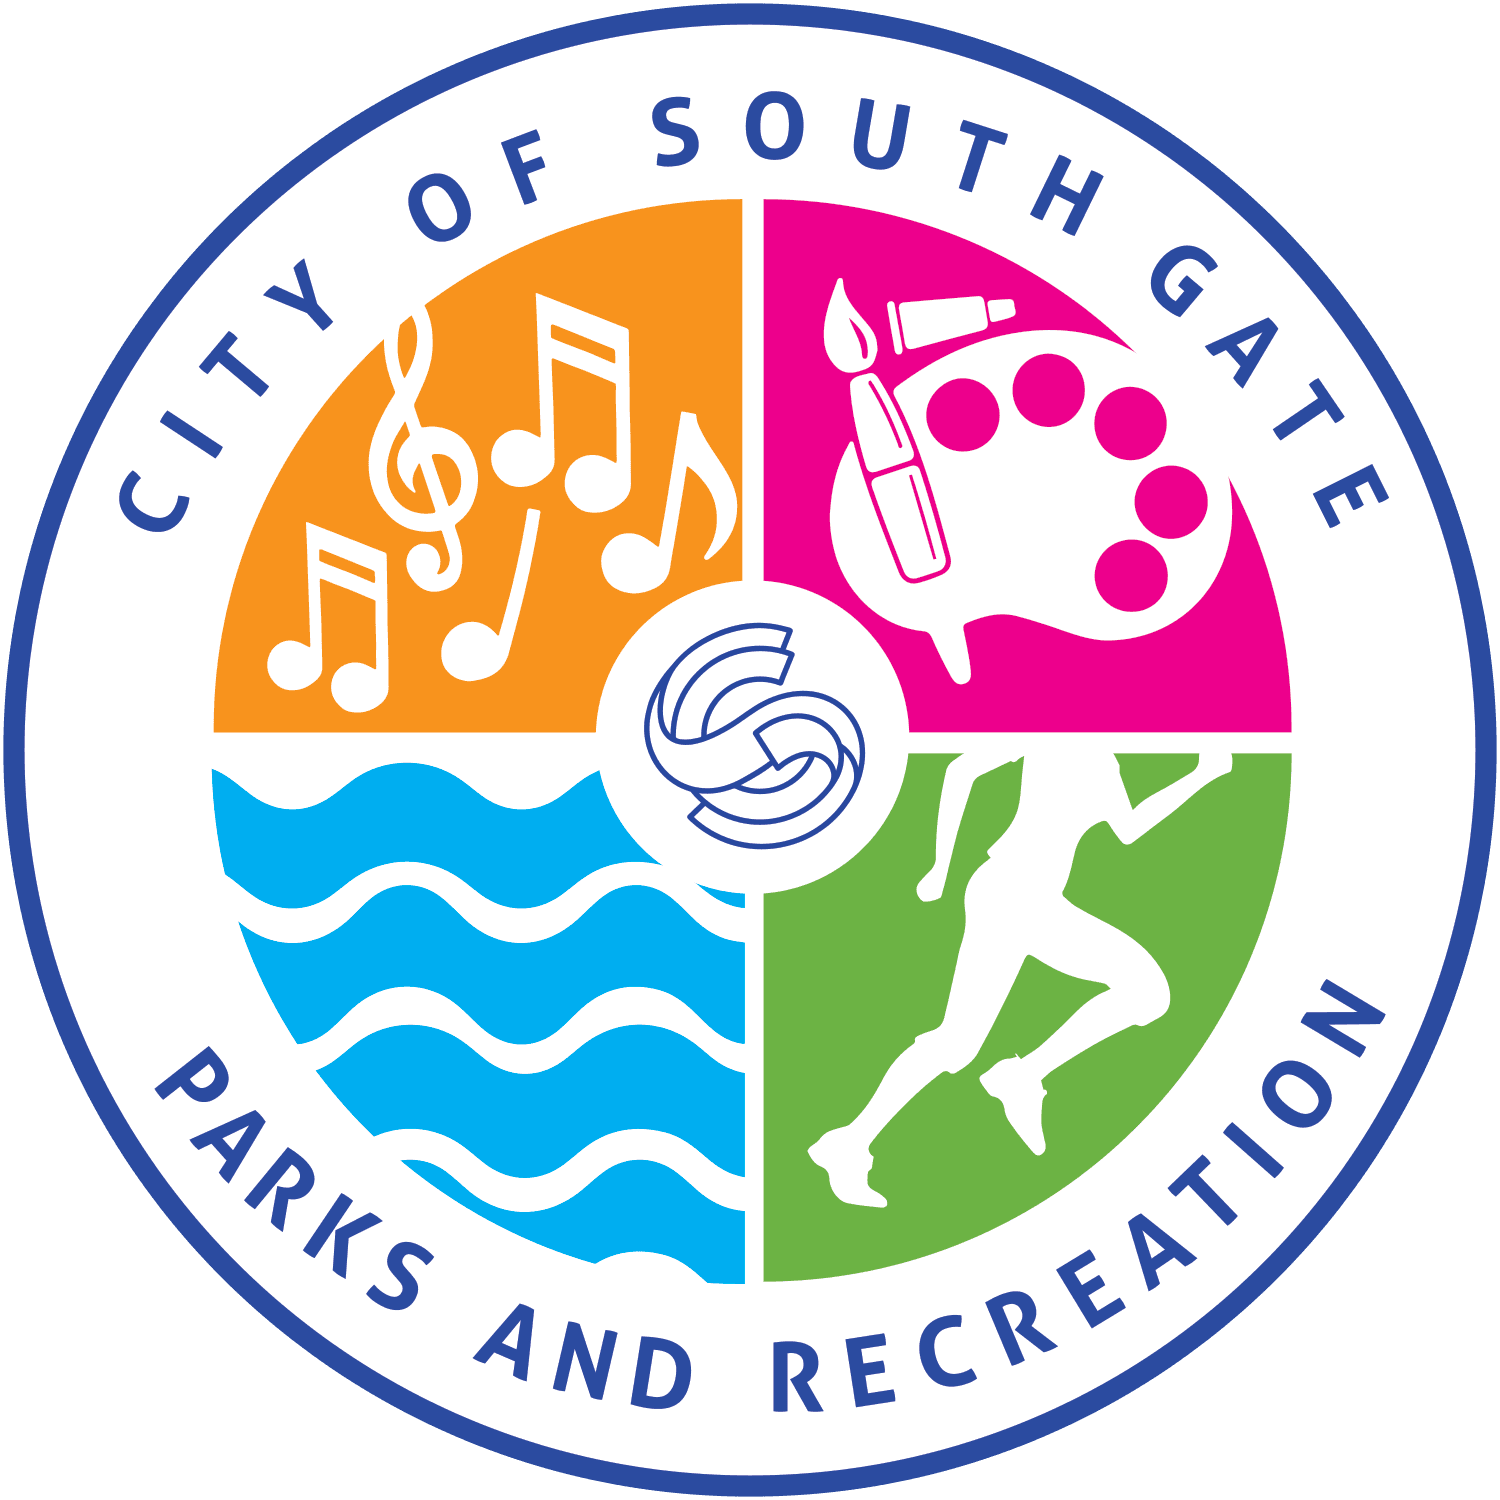 South Gate Parks & Recreation logo.png